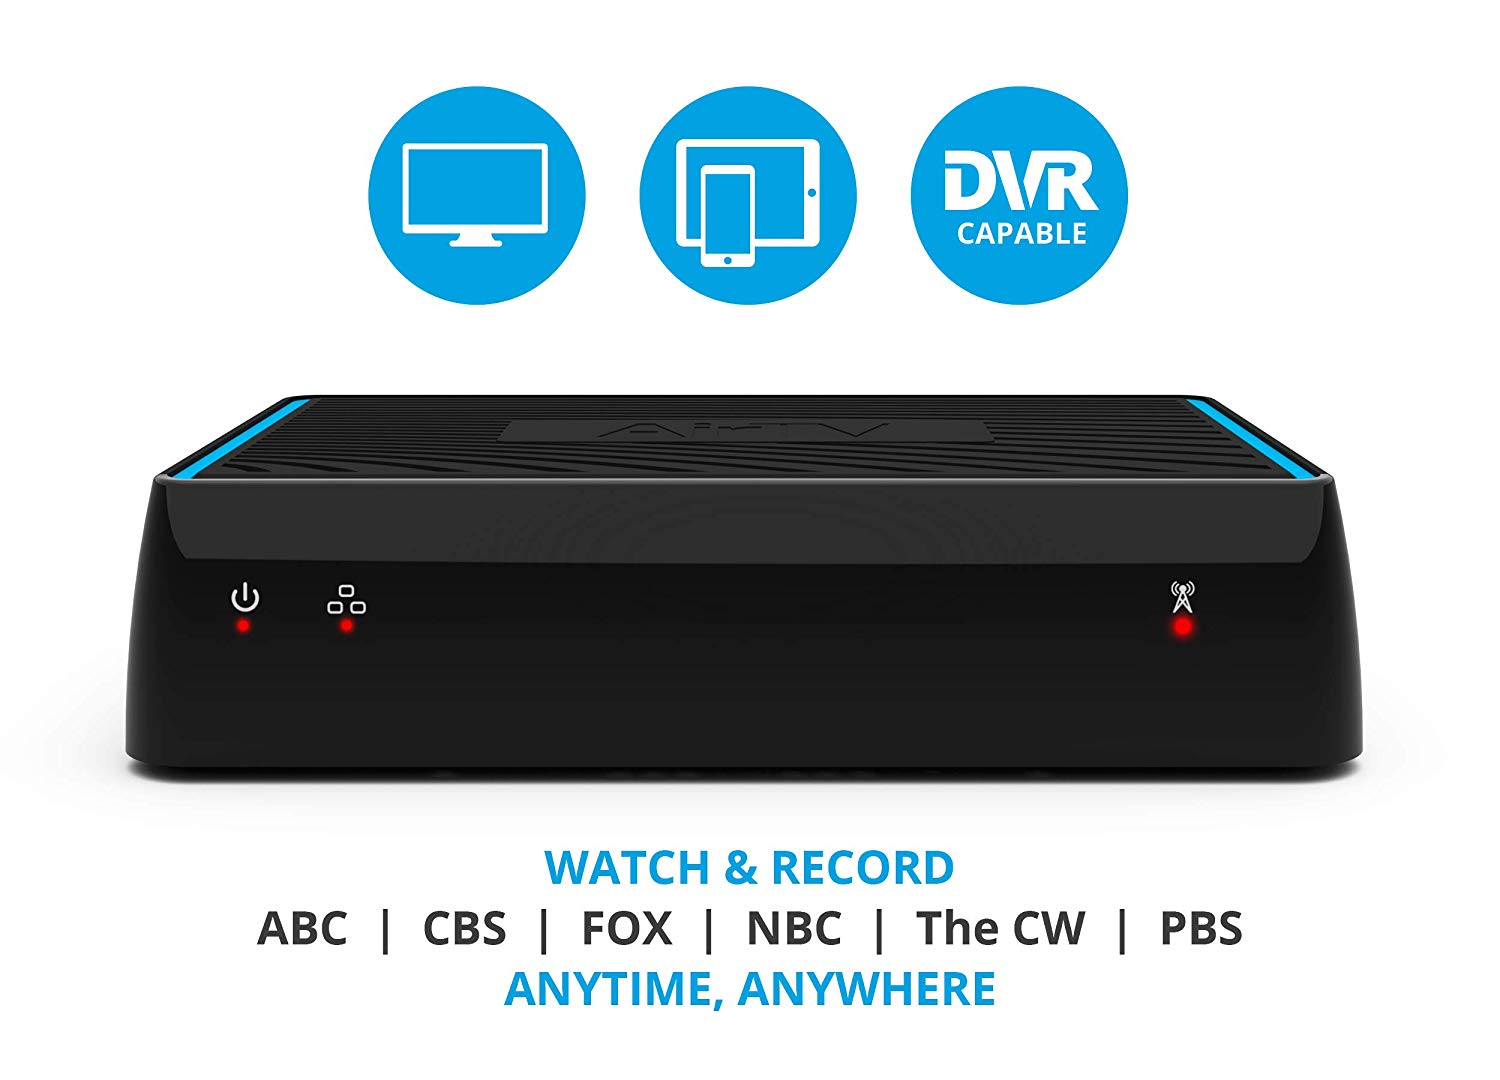 EXPIRED: Sling TV’s AirTV Dual-Tuner OTA DVR is On Sale For Just $59.99 (Lowest Price Ever)